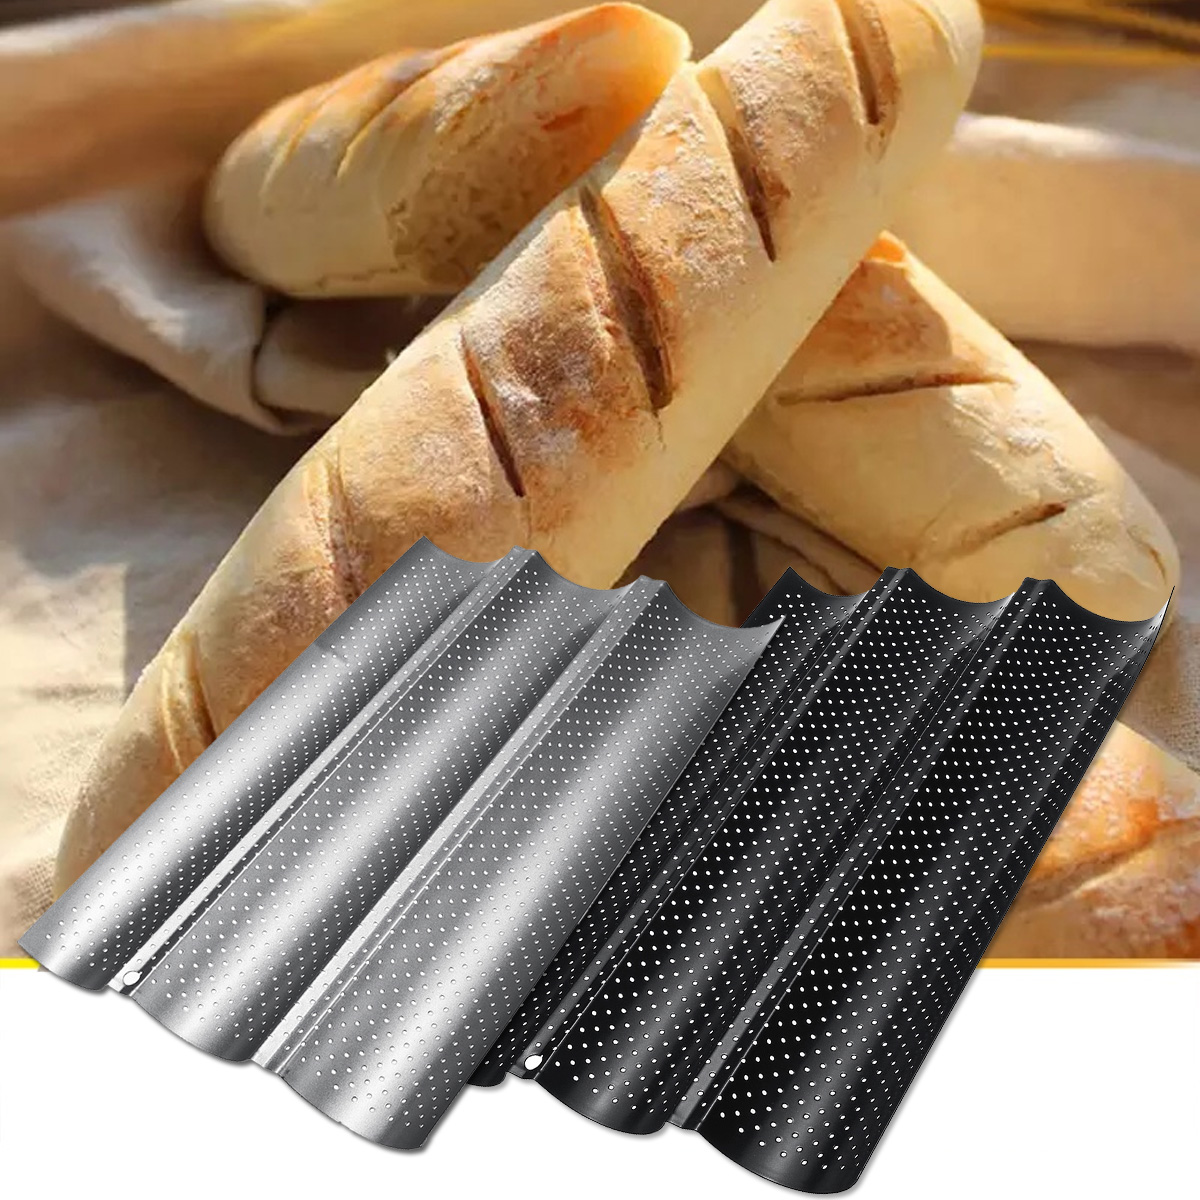 23-Grooves-Alloy-Non-Stick-French-Bread-Baking-Tray-Baguette-Pan-Tin-Tray-Bakeware-Mold-1393436-2